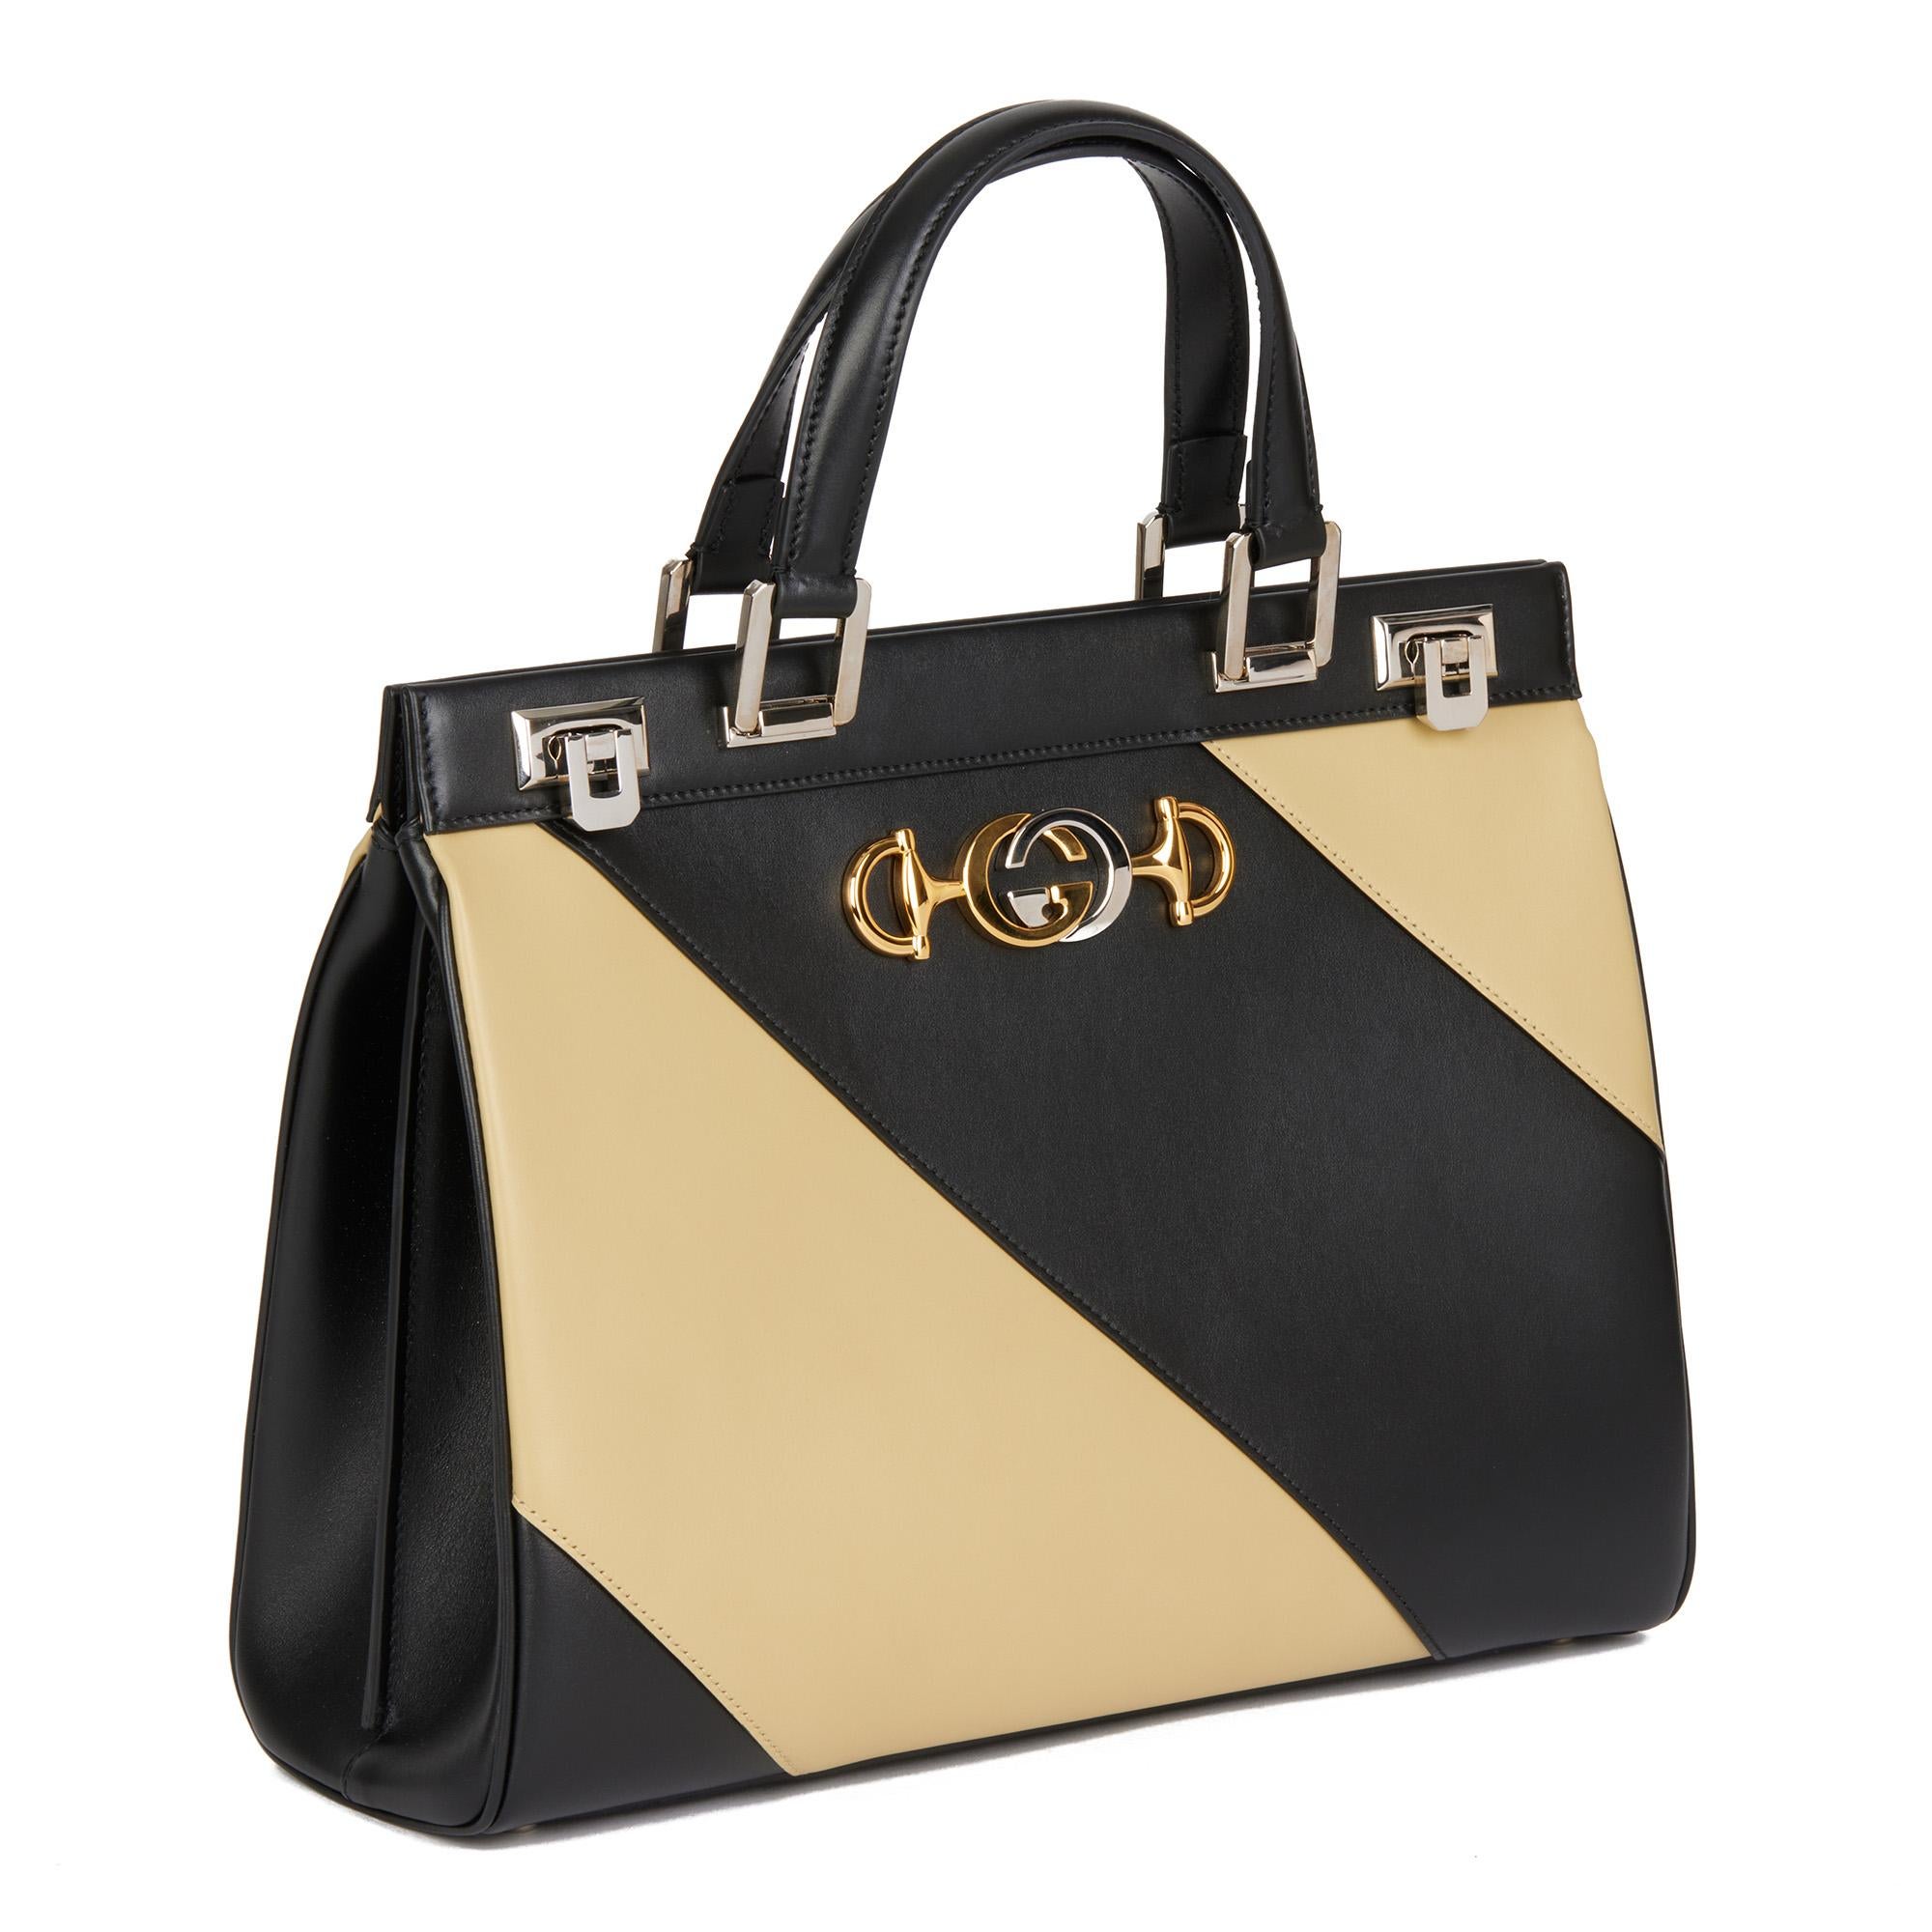 GUCCI
Black & Cream Diagonal Stitched Calfskin Leather Zumi Tote

Serial Number: 564714 520981
Age (Circa): 2021
Accompanied By: Care Booklet, Shoulder Strap
Authenticity Details: Date Stamp (Made in Italy)
Gender: Ladies
Type: Tote,